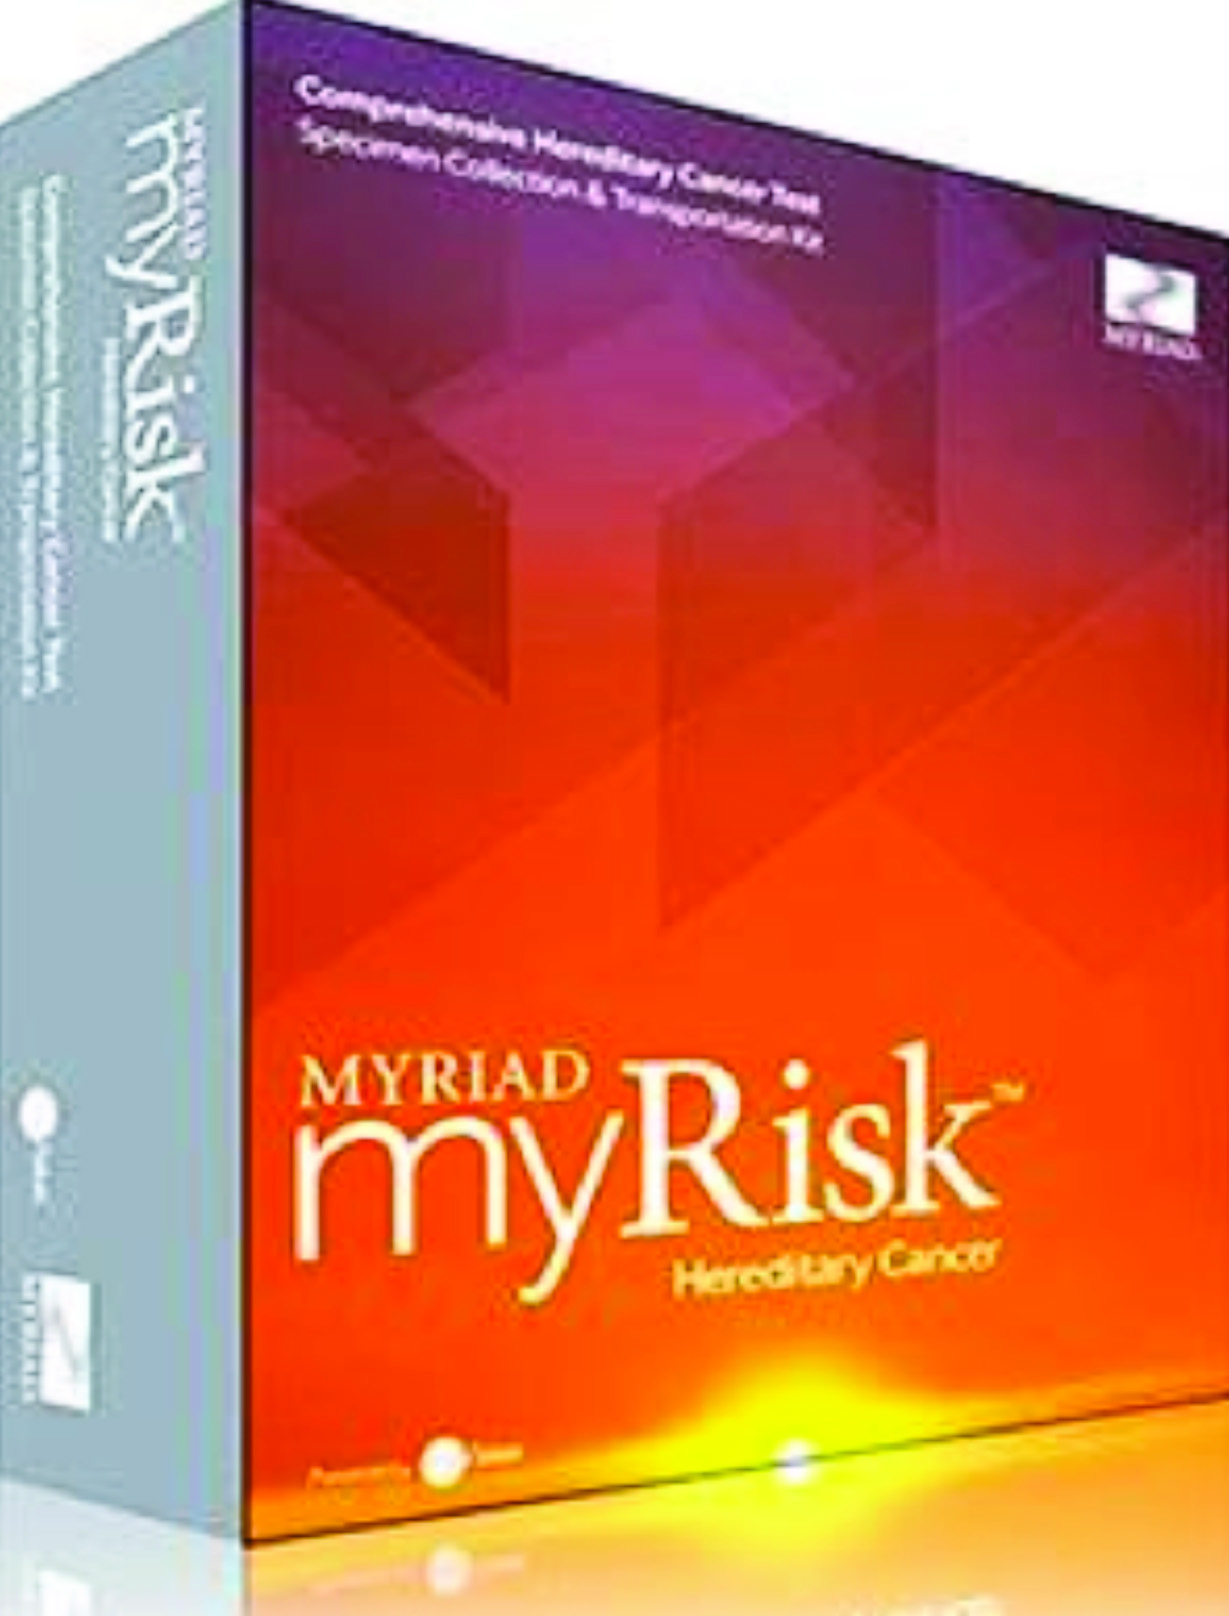 Image: The myRisk hereditary cancer screening collection kit (Photo courtesy of Myriad Genetic Laboratories).